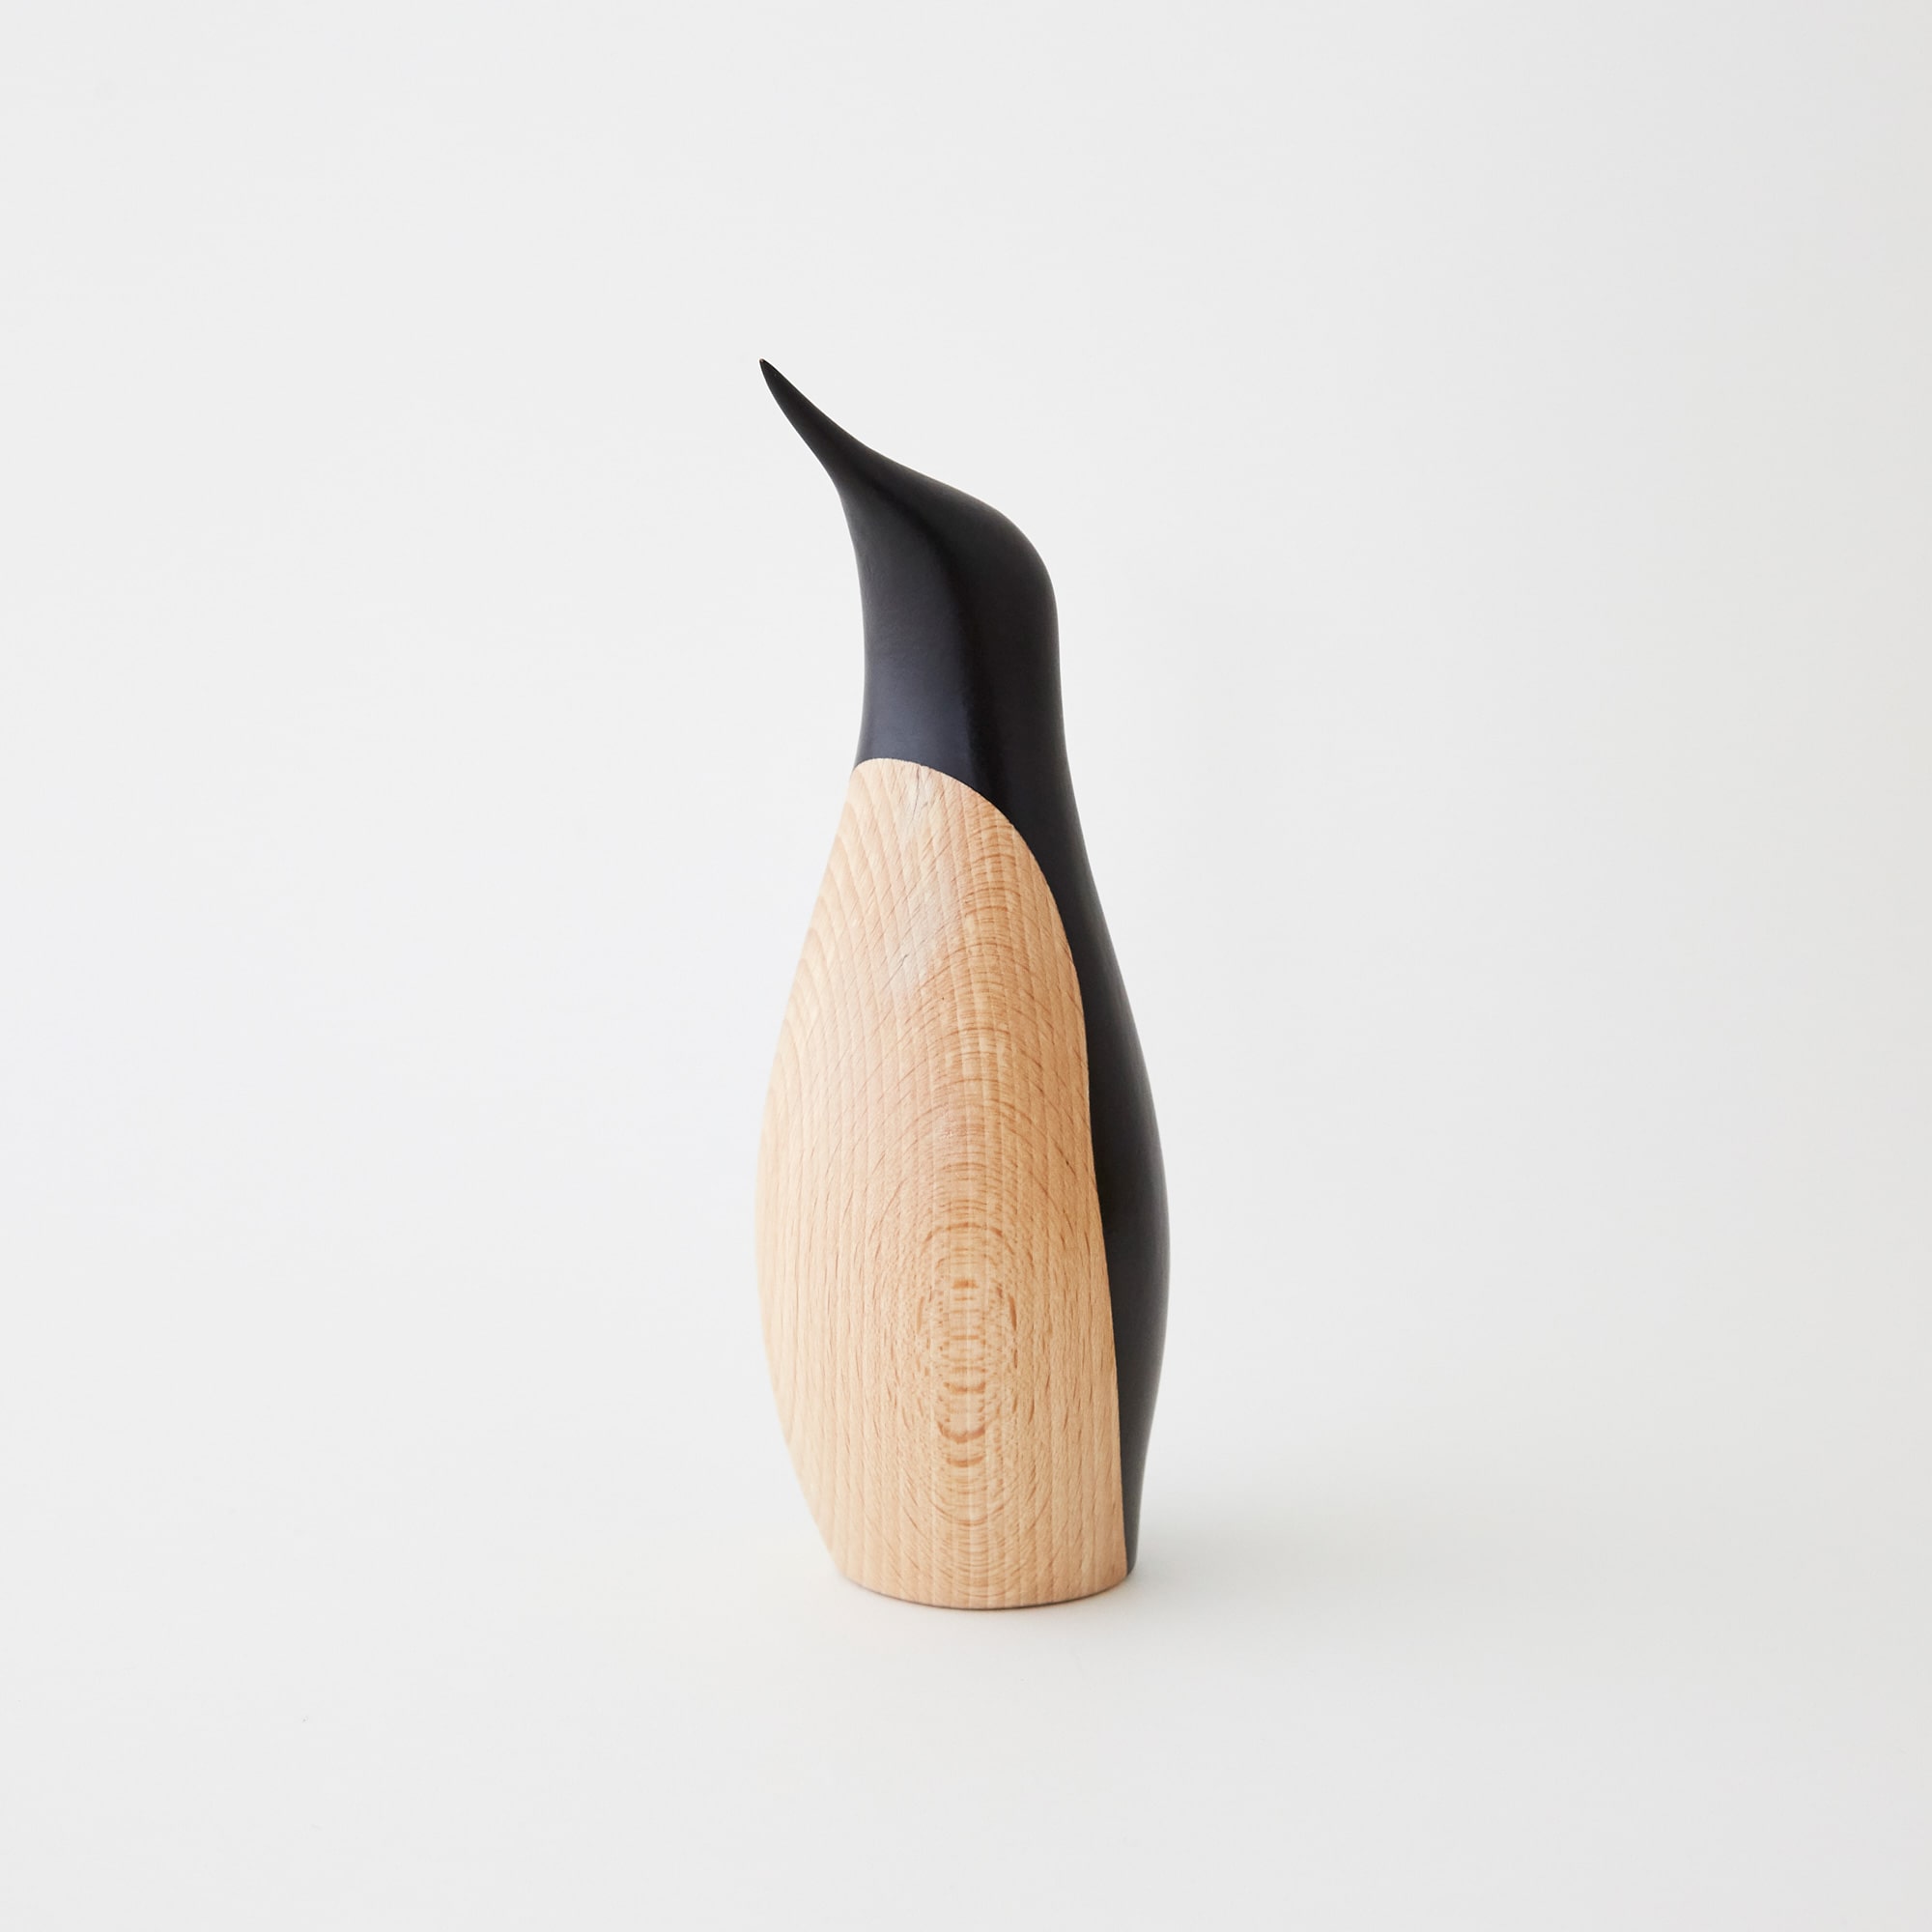 ☆ARCHITECTMADE PENGUIN small｜その他オブジェ｜IDEE SHOP Online